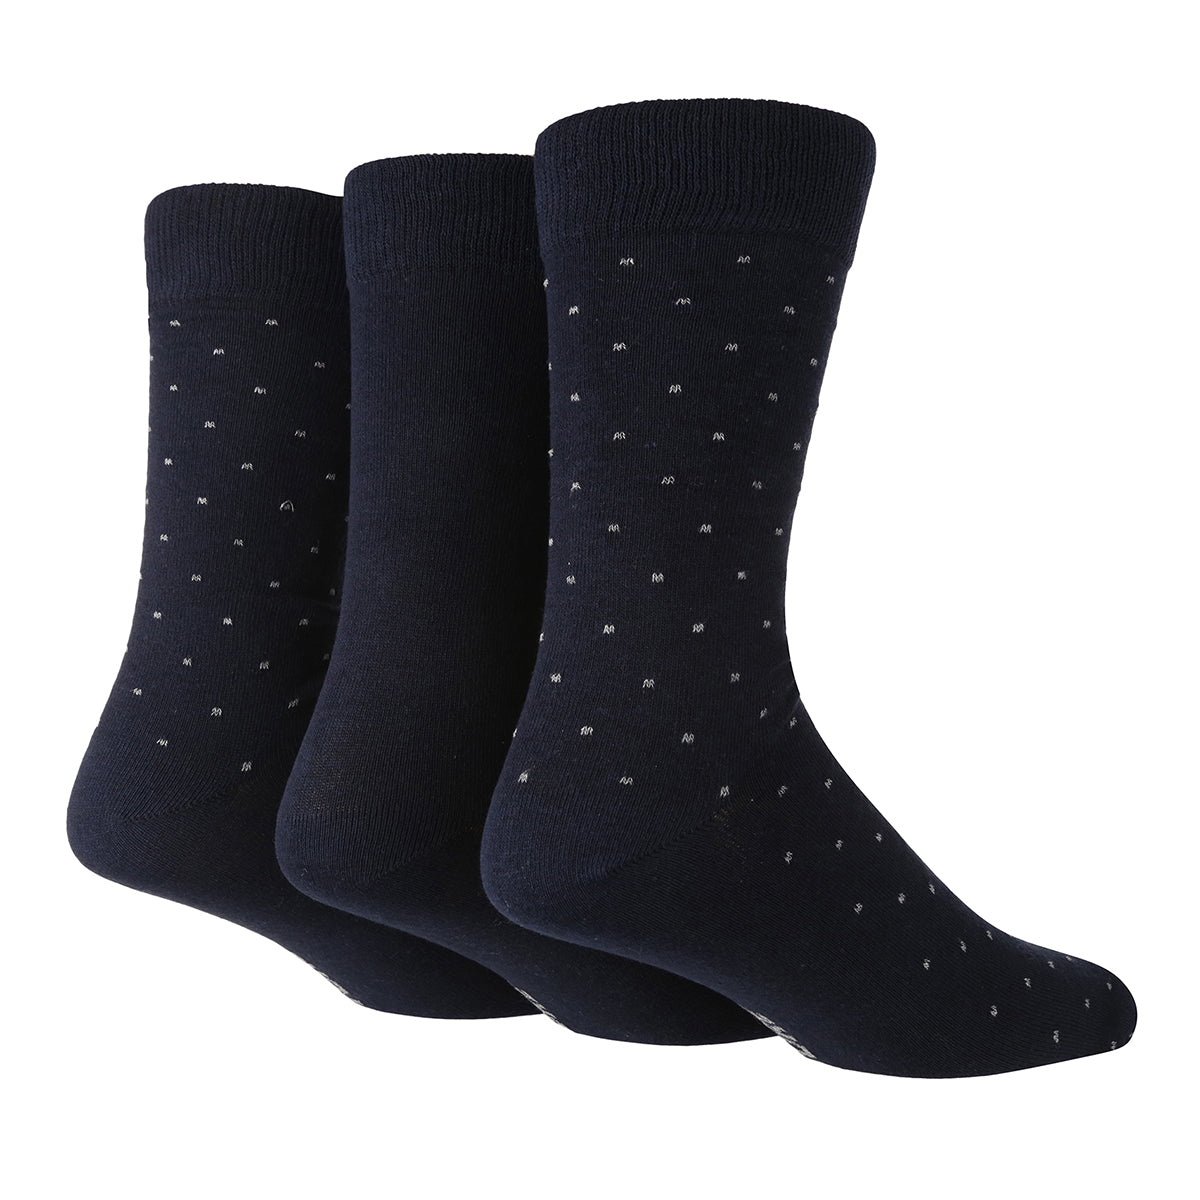 TORE 100% Recycled Men's High Cut Ped Socks - 3 Pairs